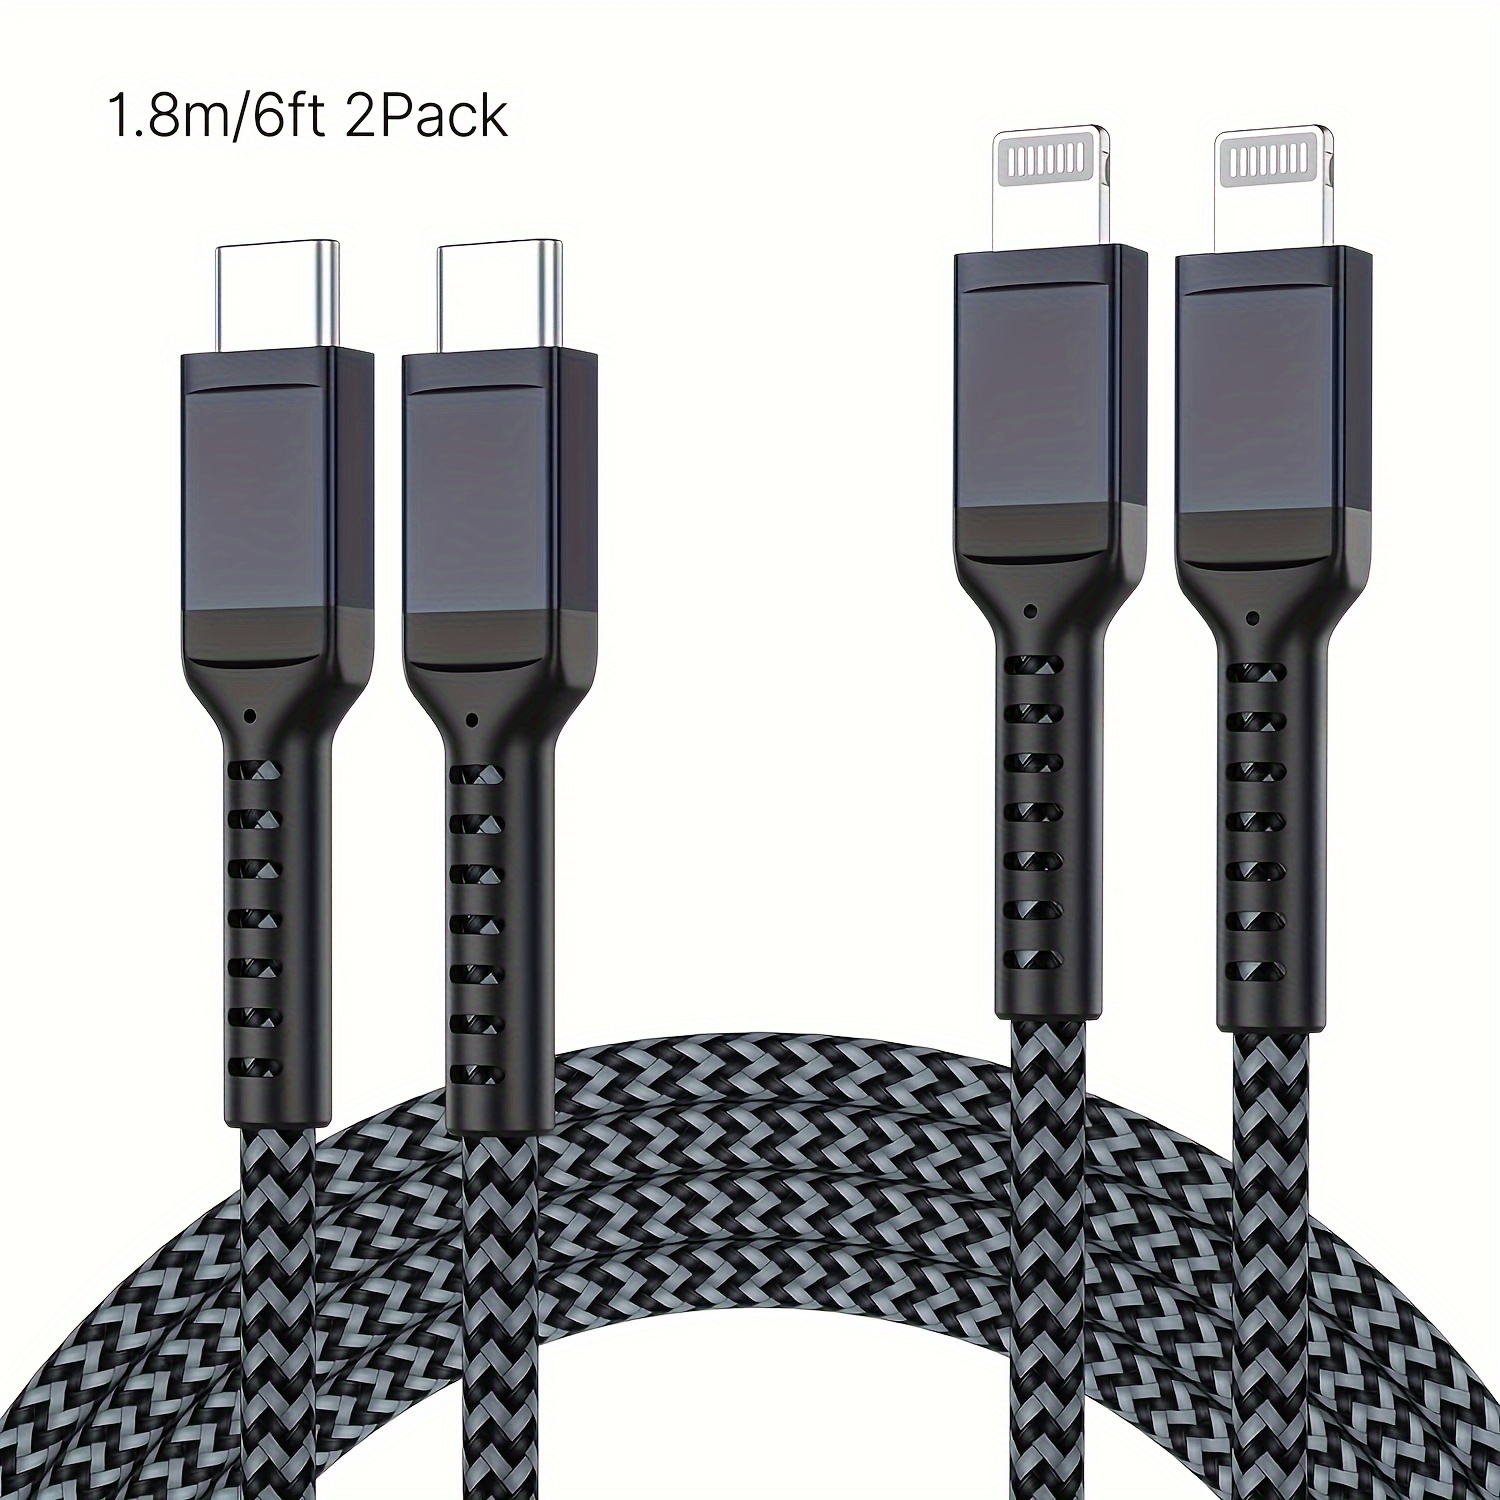 

Usb C To Charging Cable For Iphone 6ft/2m 2packs, Power Delivery Usb C Iphone Cable Braided Type C Iphone Charger Fast Charging Cord For Iphone 14 13 12 11 Pro Max Xr Xs X 8 7 6 Plus Se, Ipad